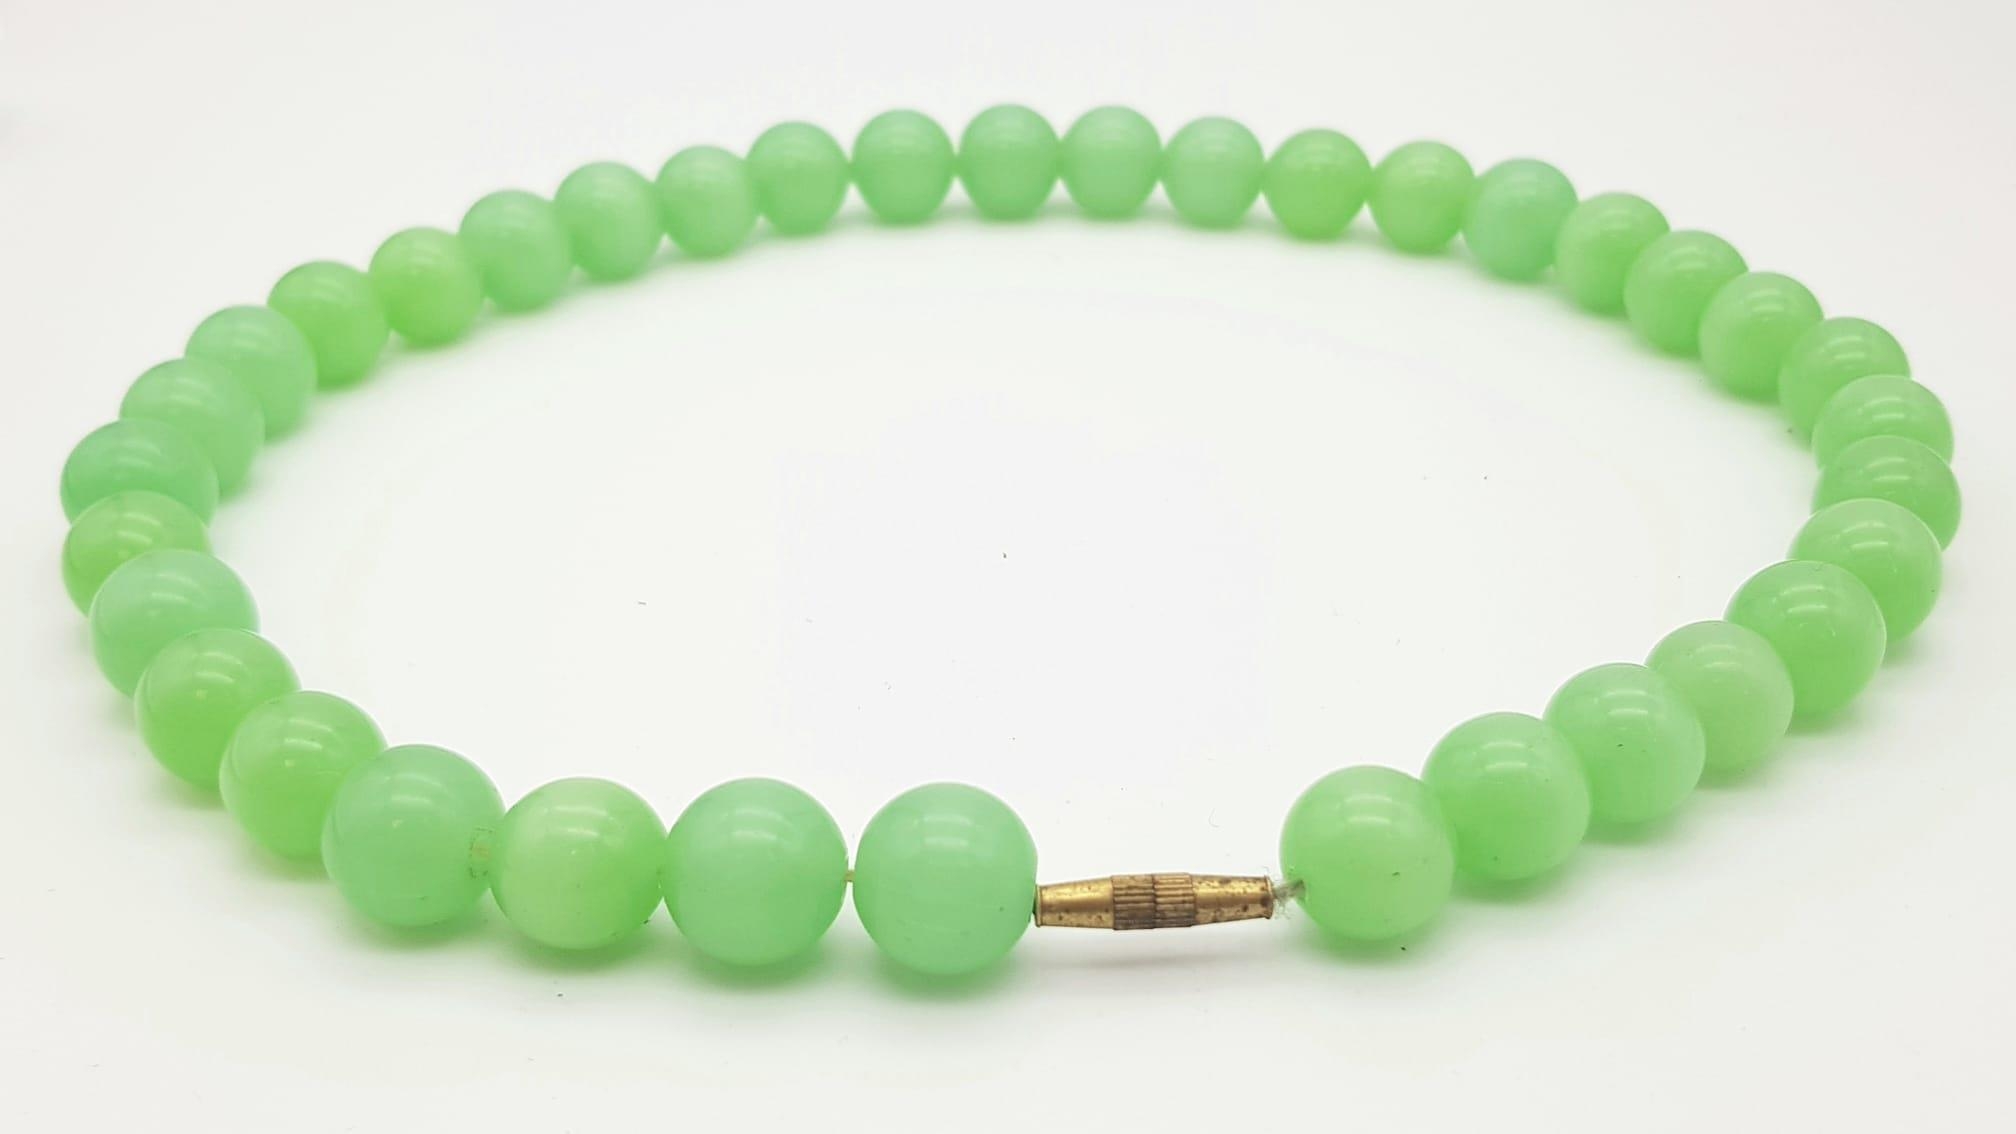 A Vintage Lime-Green Jade Bead Necklace. Lovely 14mm beads with a gilded barrel clasp. 46cm - Image 8 of 8